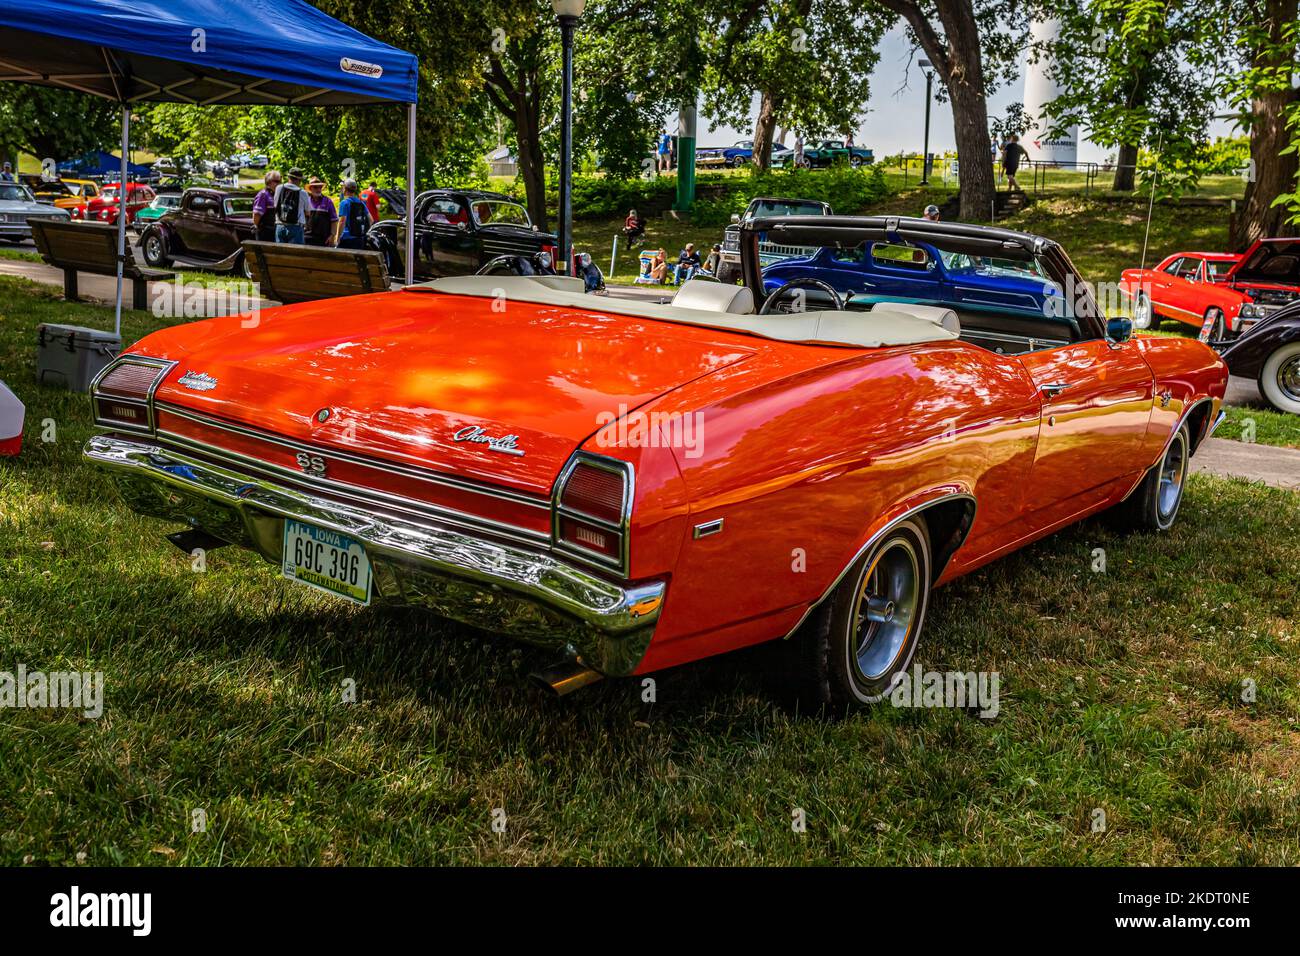 Des Moines, IA - July 02, 2022: High perspective rear corner view of a 1969 Chevrolet Chevelle SS Convertible at a local car show. Stock Photo